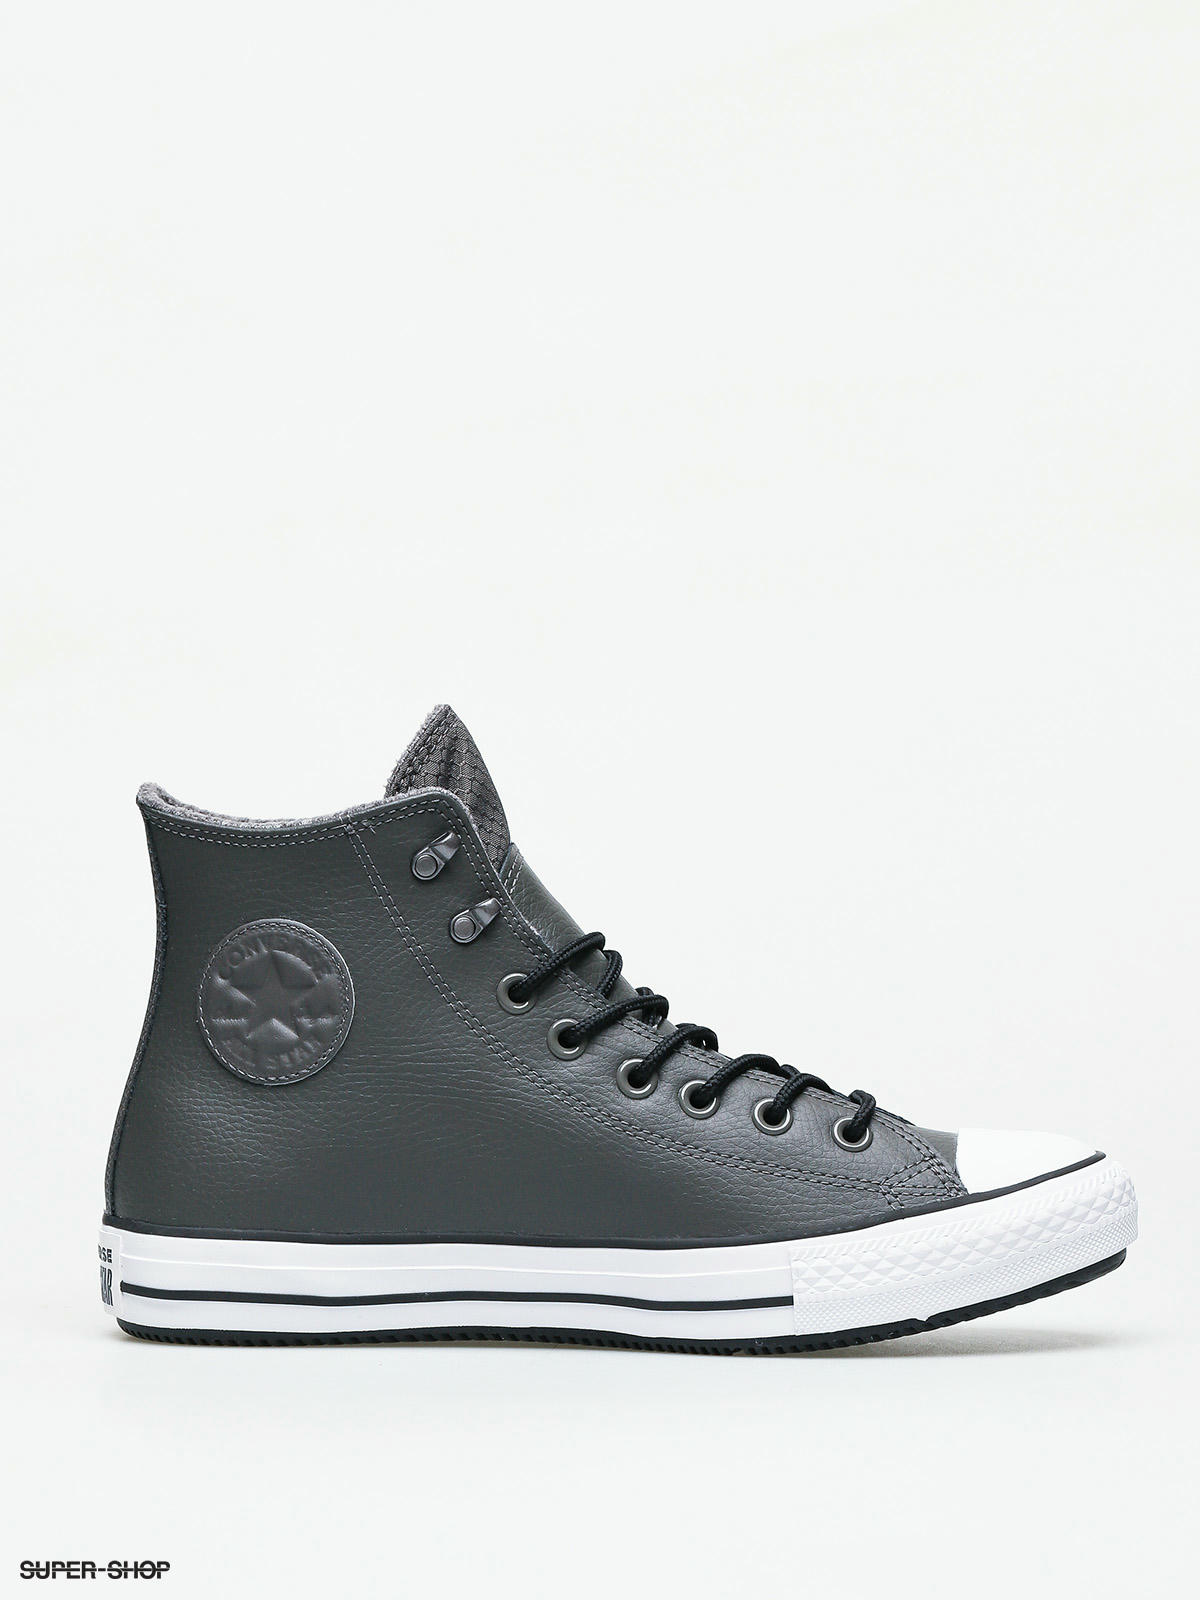 converse chuck taylor grey leather